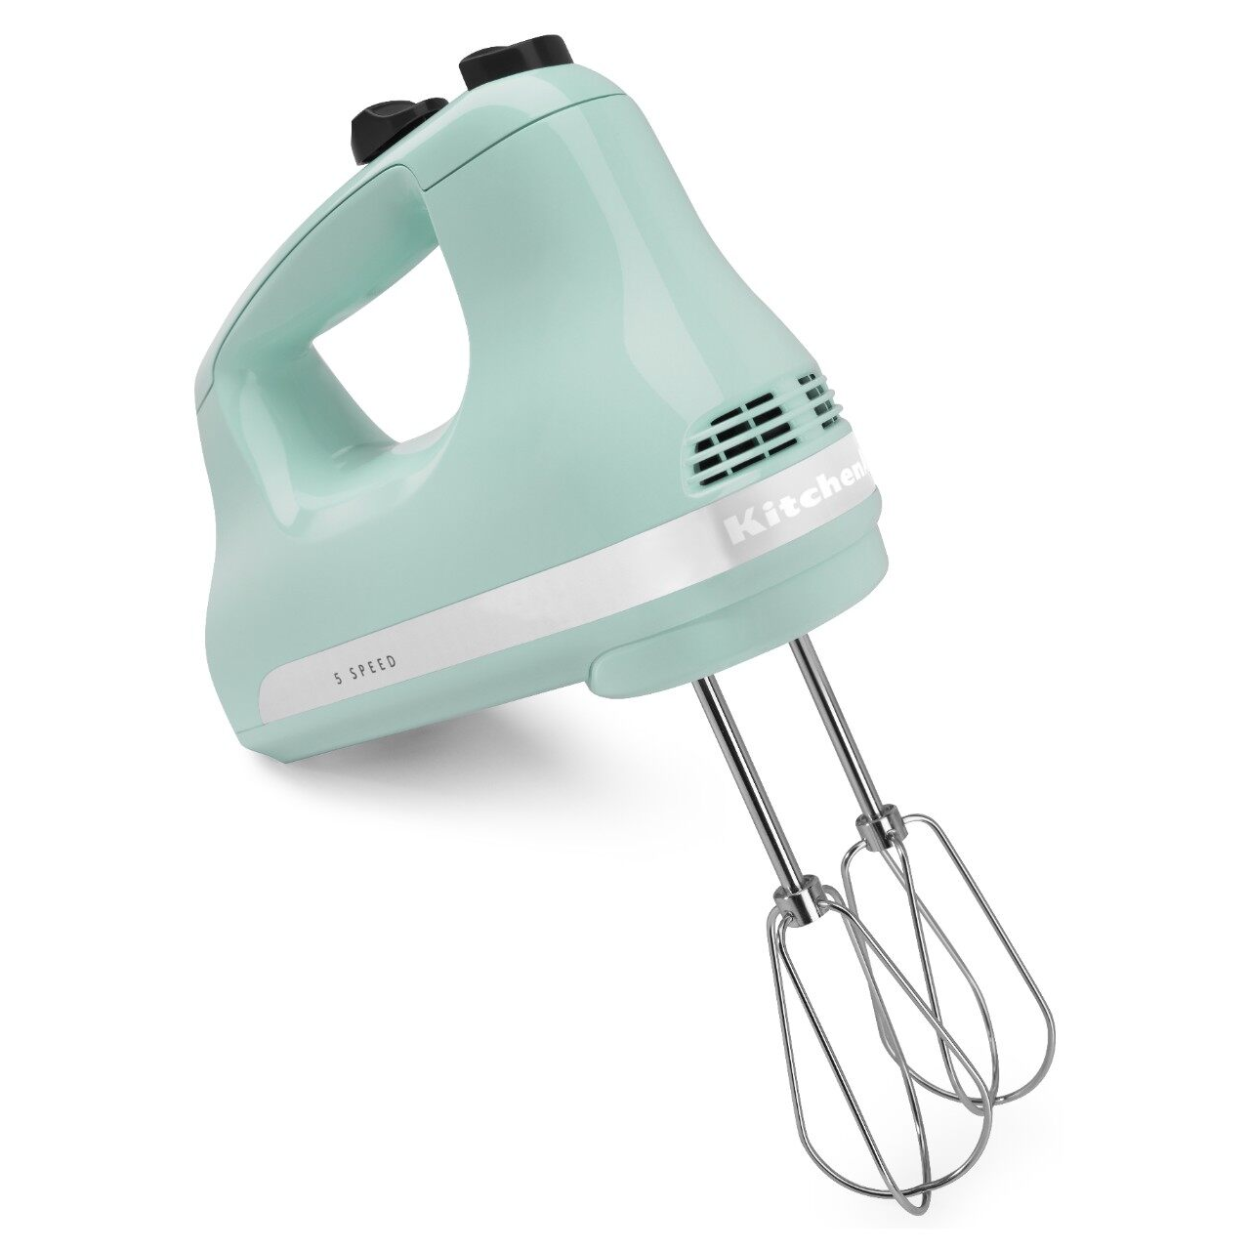 Magnolia Bakery 5 Speed Hand Mixer 62601, Color: Blue - JCPenney